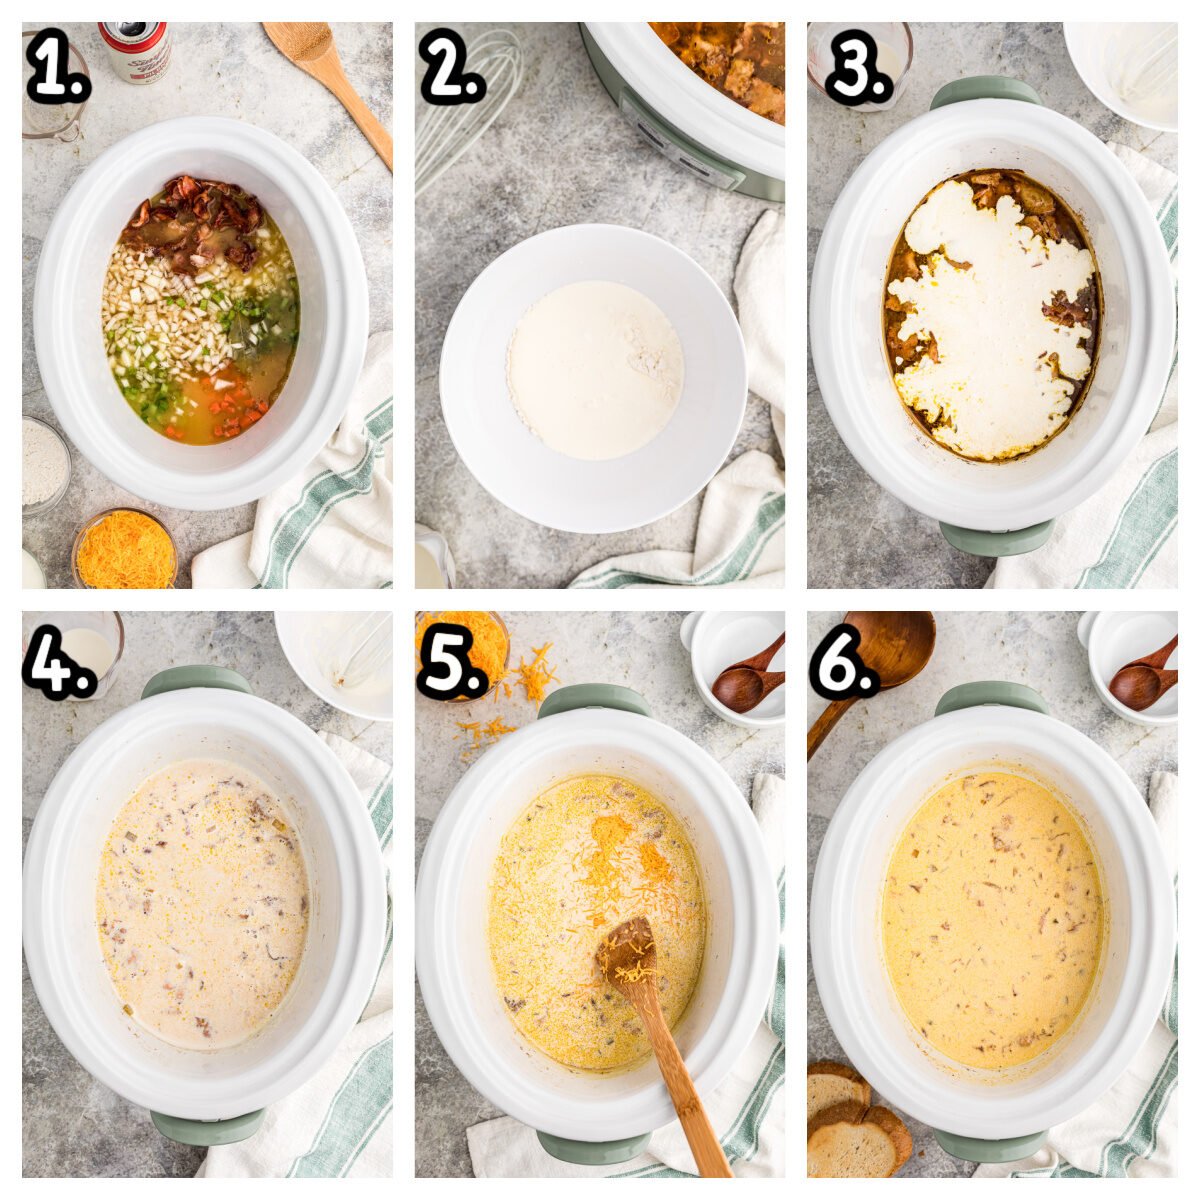 6 images showing how to make beer cheese soup in the slow cooker.